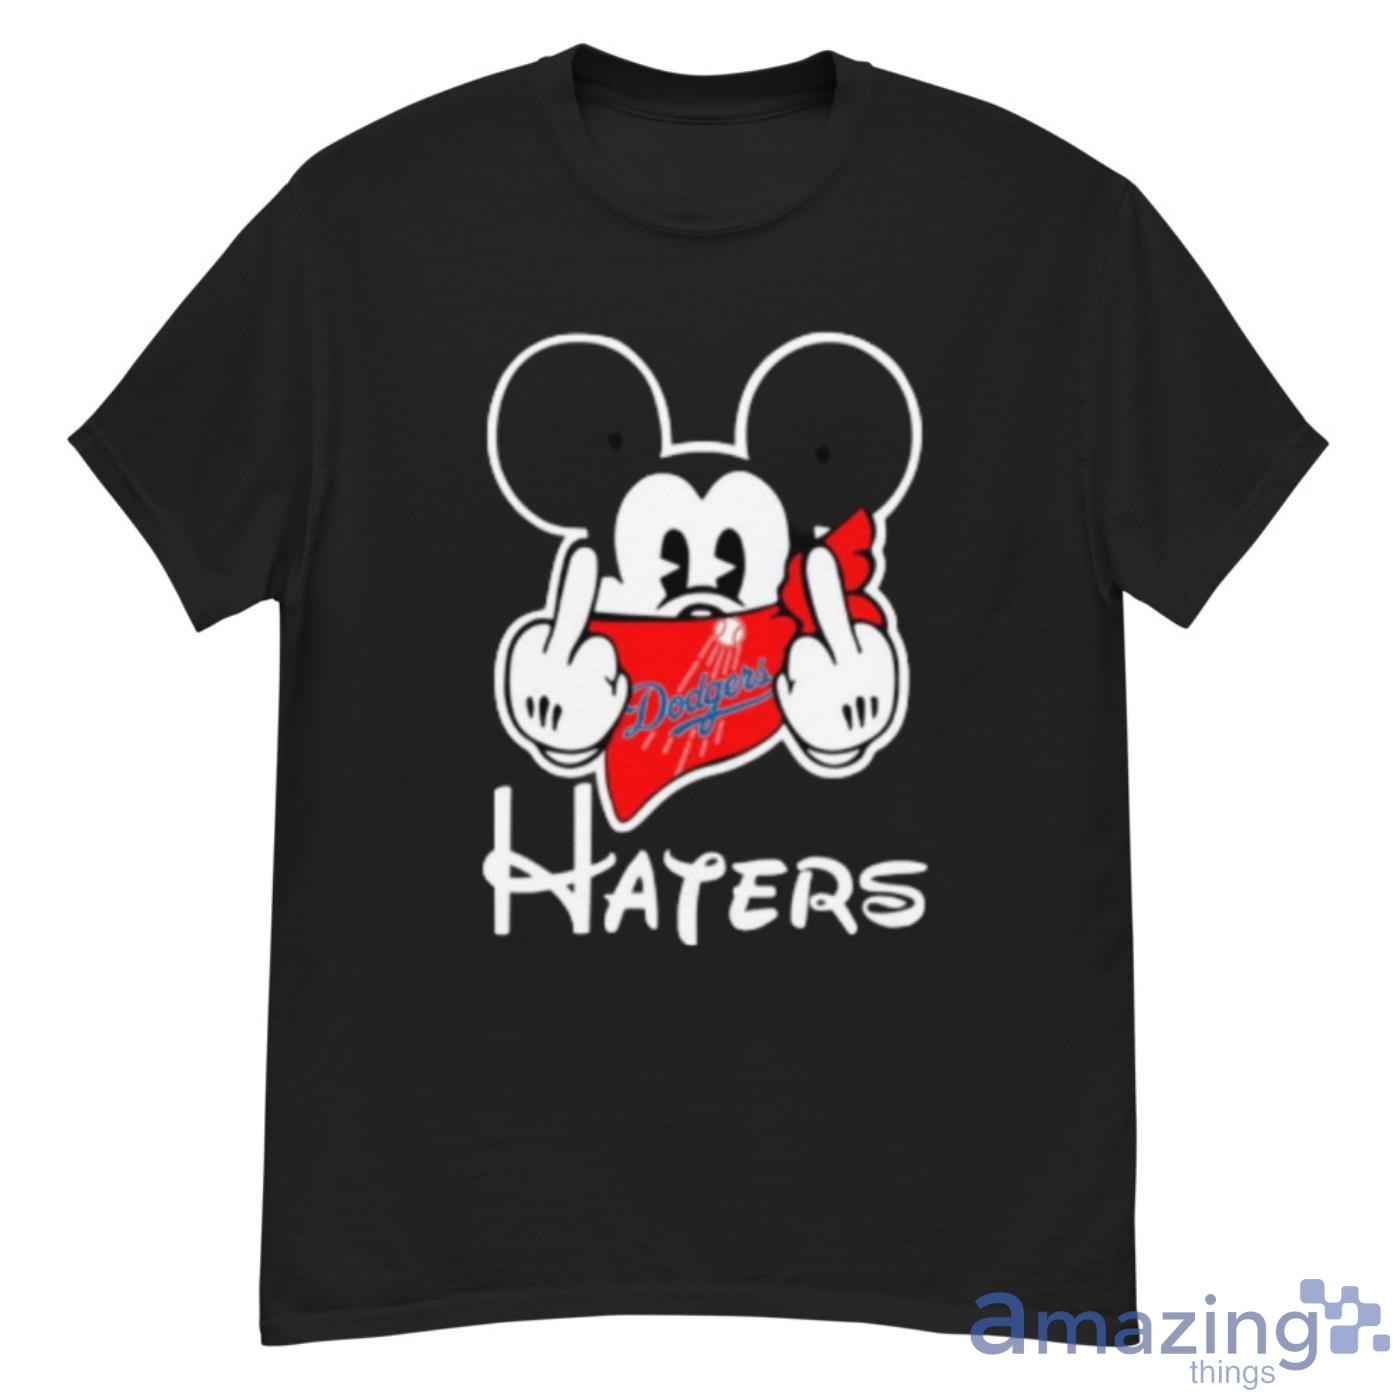 MLB Los Angeles Dodgers Haters Gonna Hate Mickey Mouse Disney